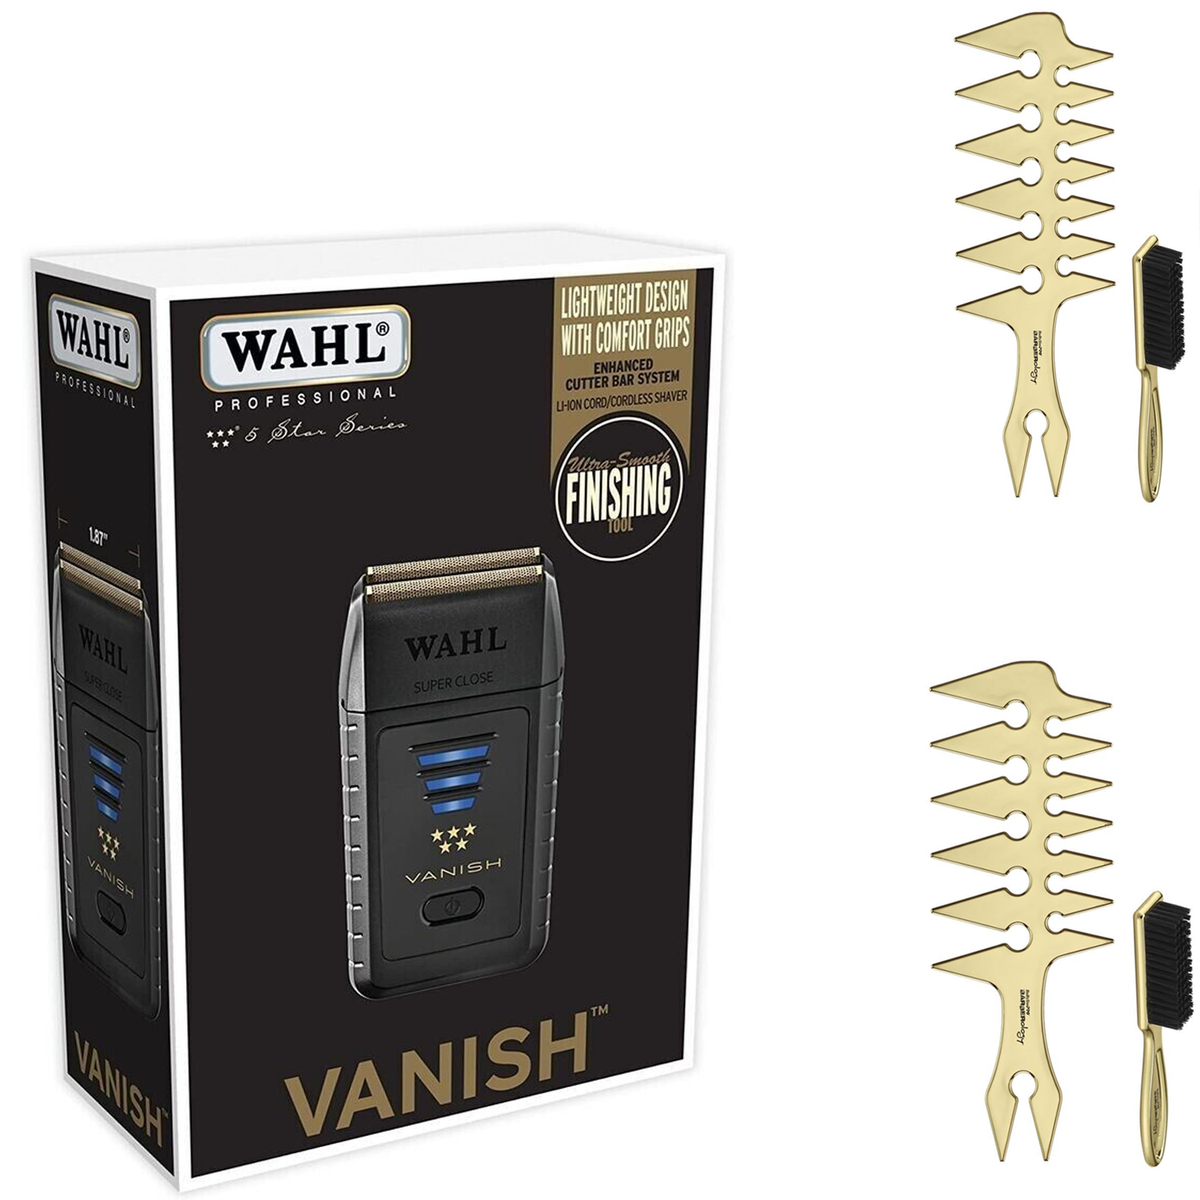 Wahl 5 Star Series Vanish Double Foil Corded/Cordless Shaver 8173 